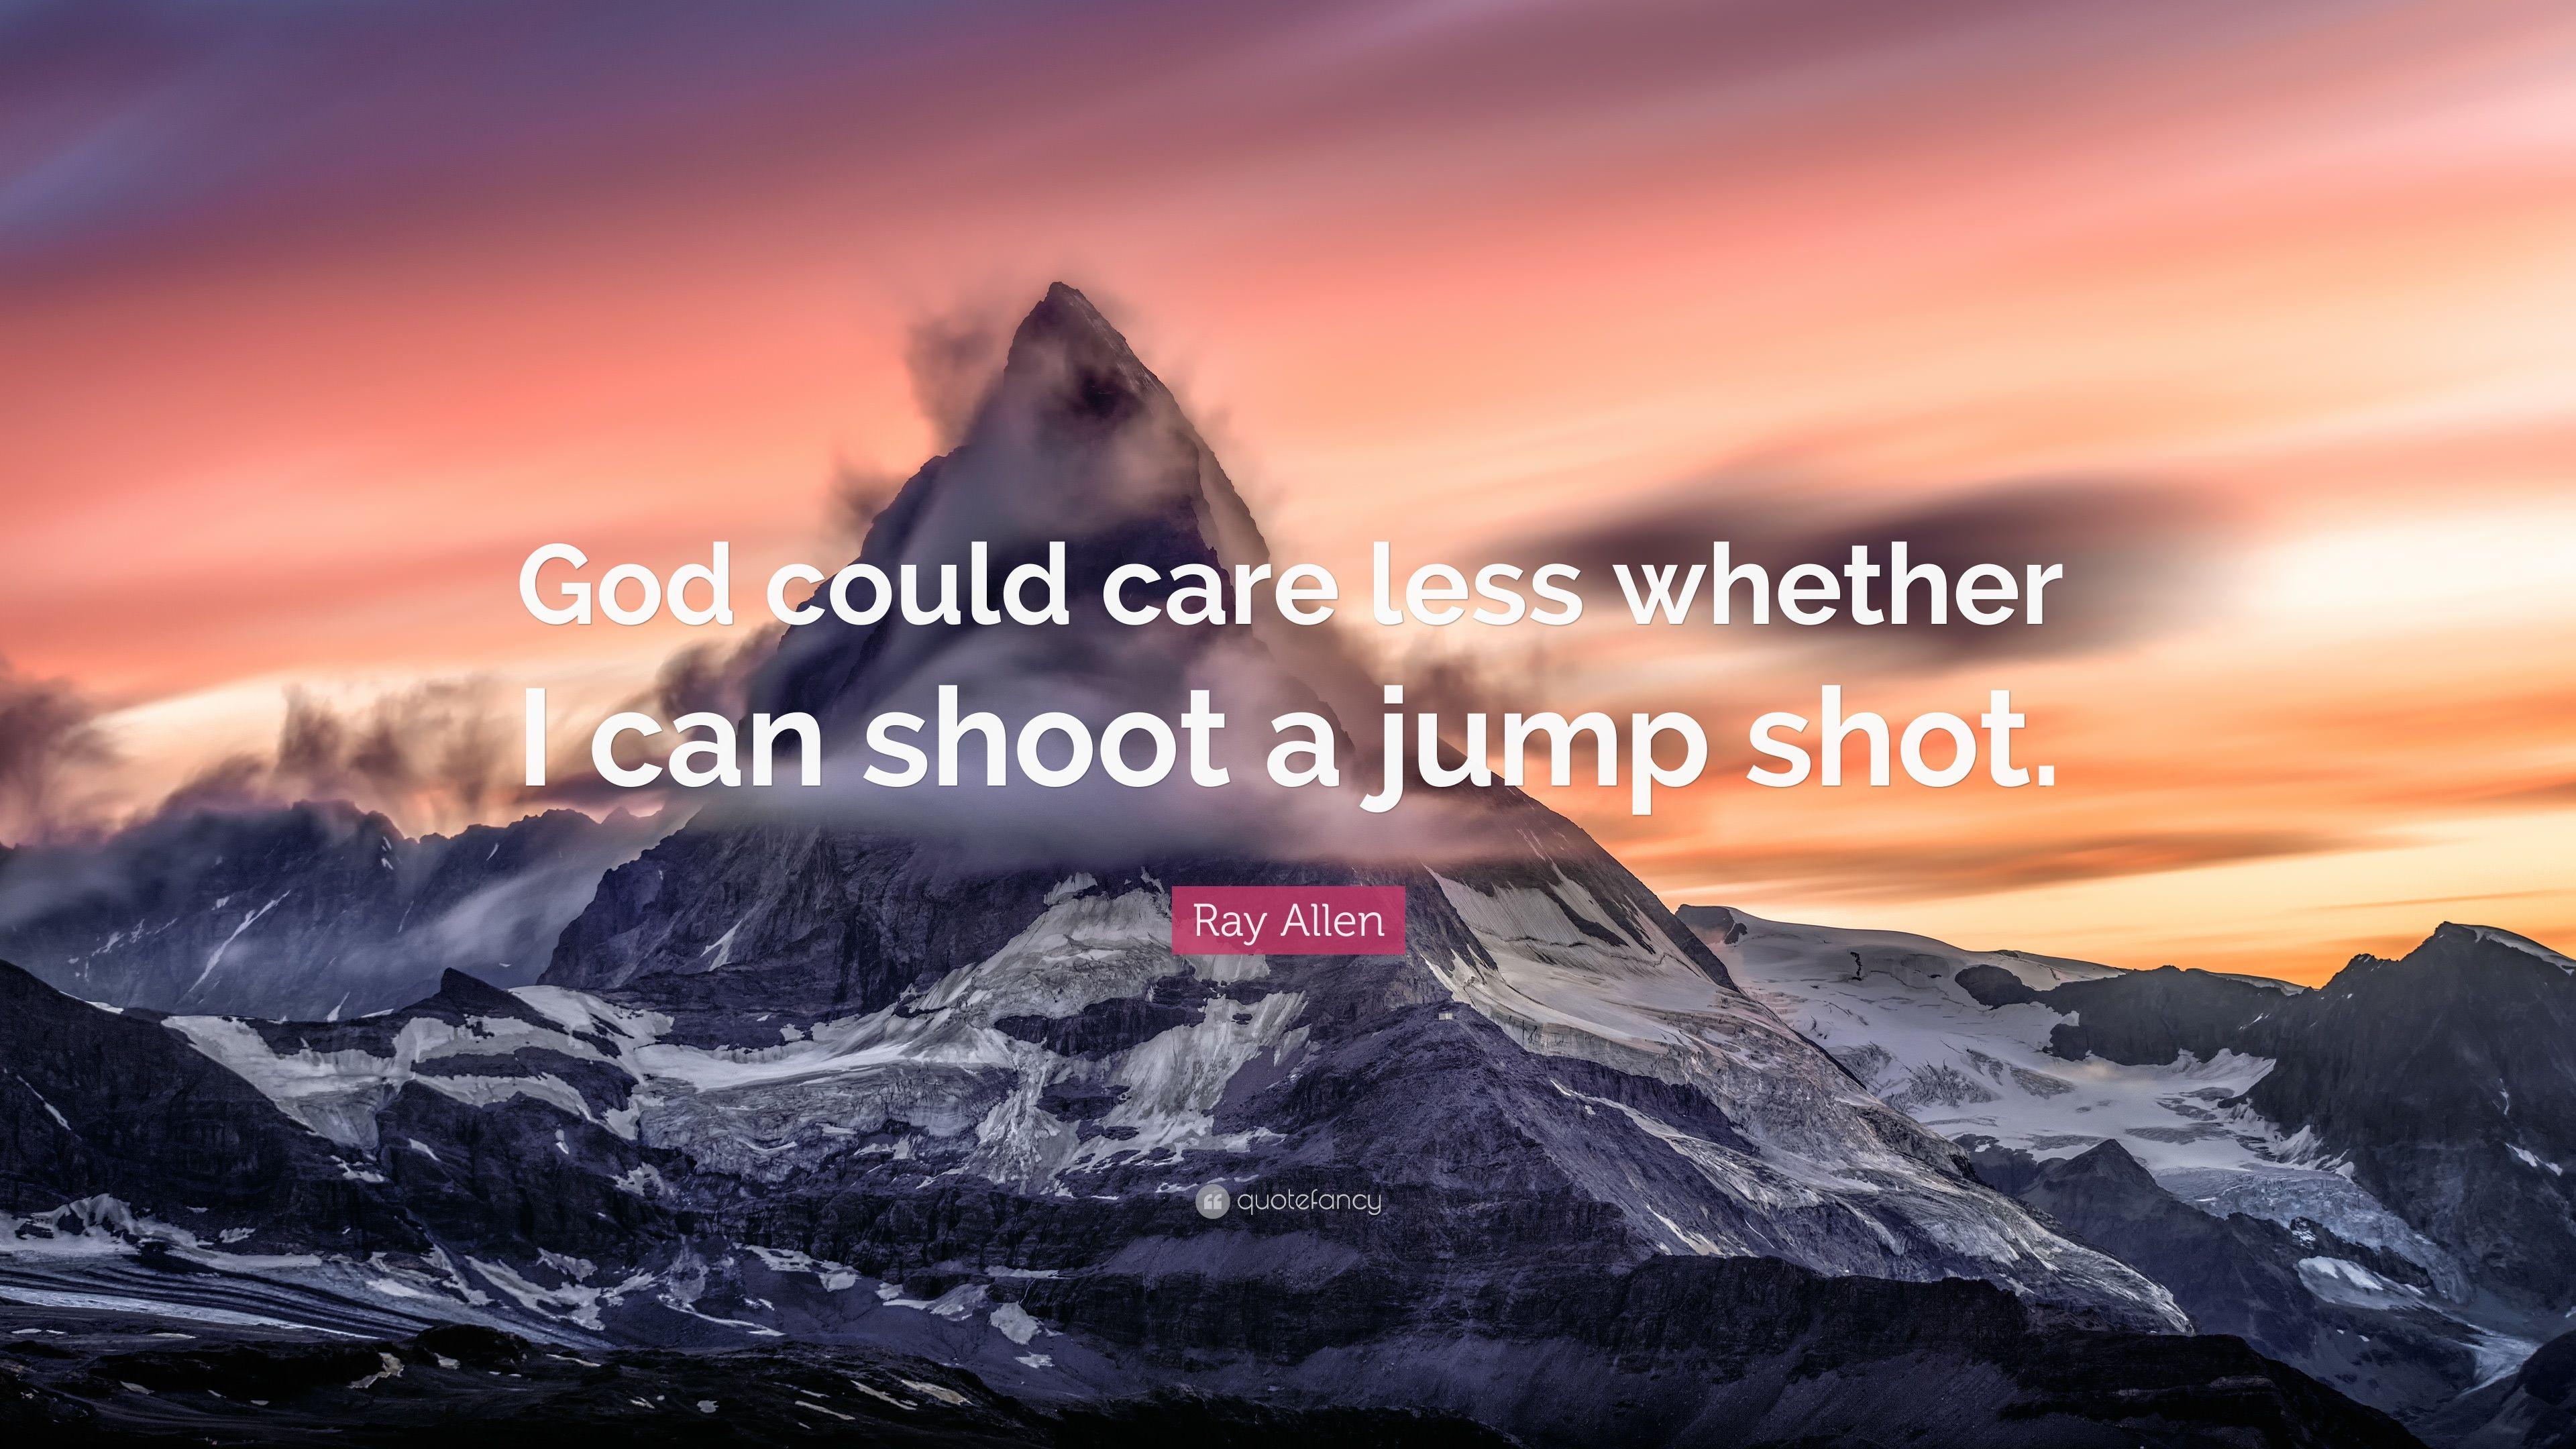 Ray Allen Quote: “God could care less whether I can shoot a jump